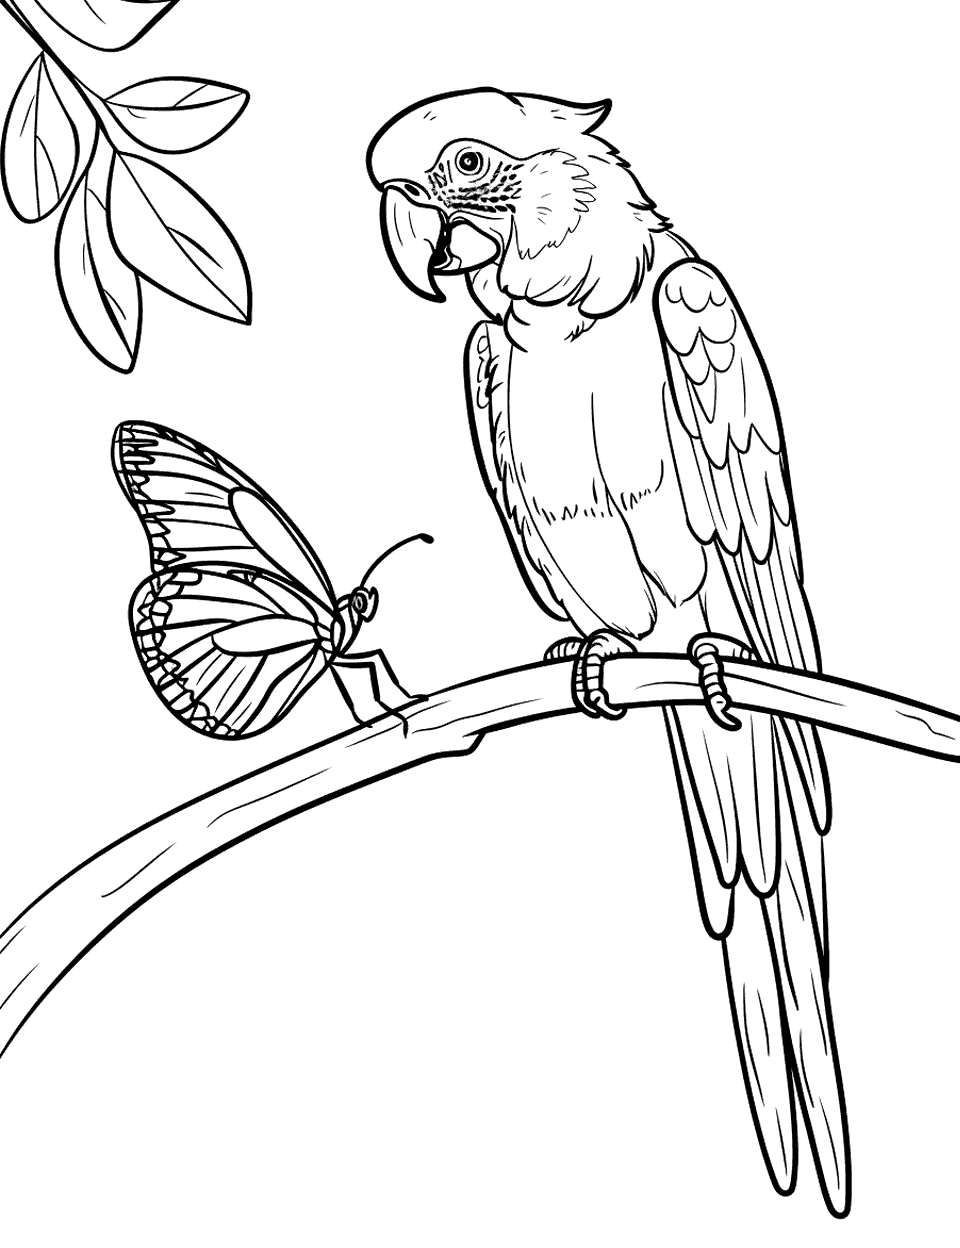 Macaw Making Friends with a Butterfly Parrot Coloring Page - A macaw looking towards a butterfly nearby.